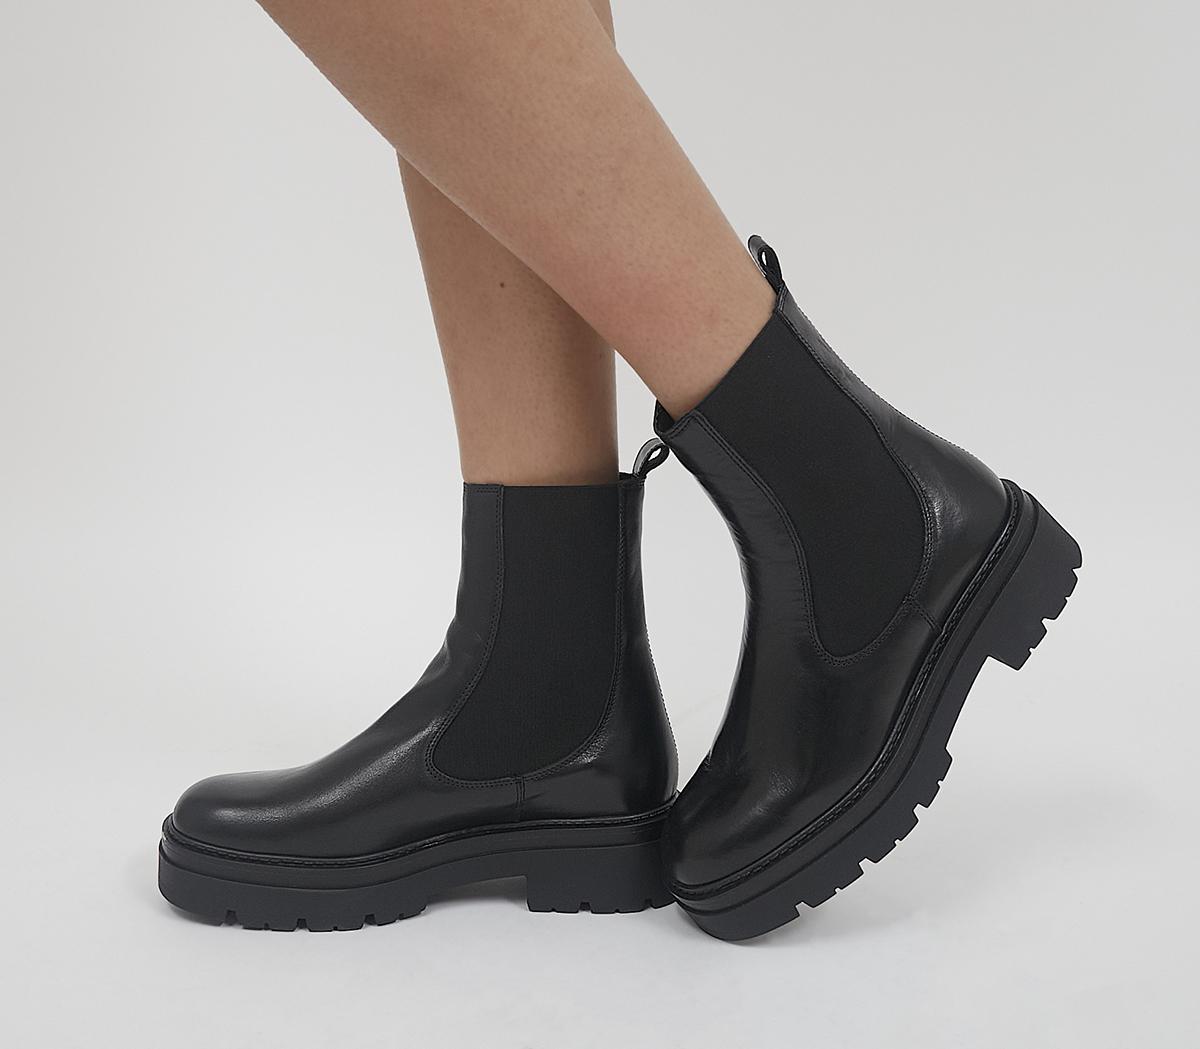 OFFICEAccuse Chunky Ankle Chelsea BootsBlack Leather